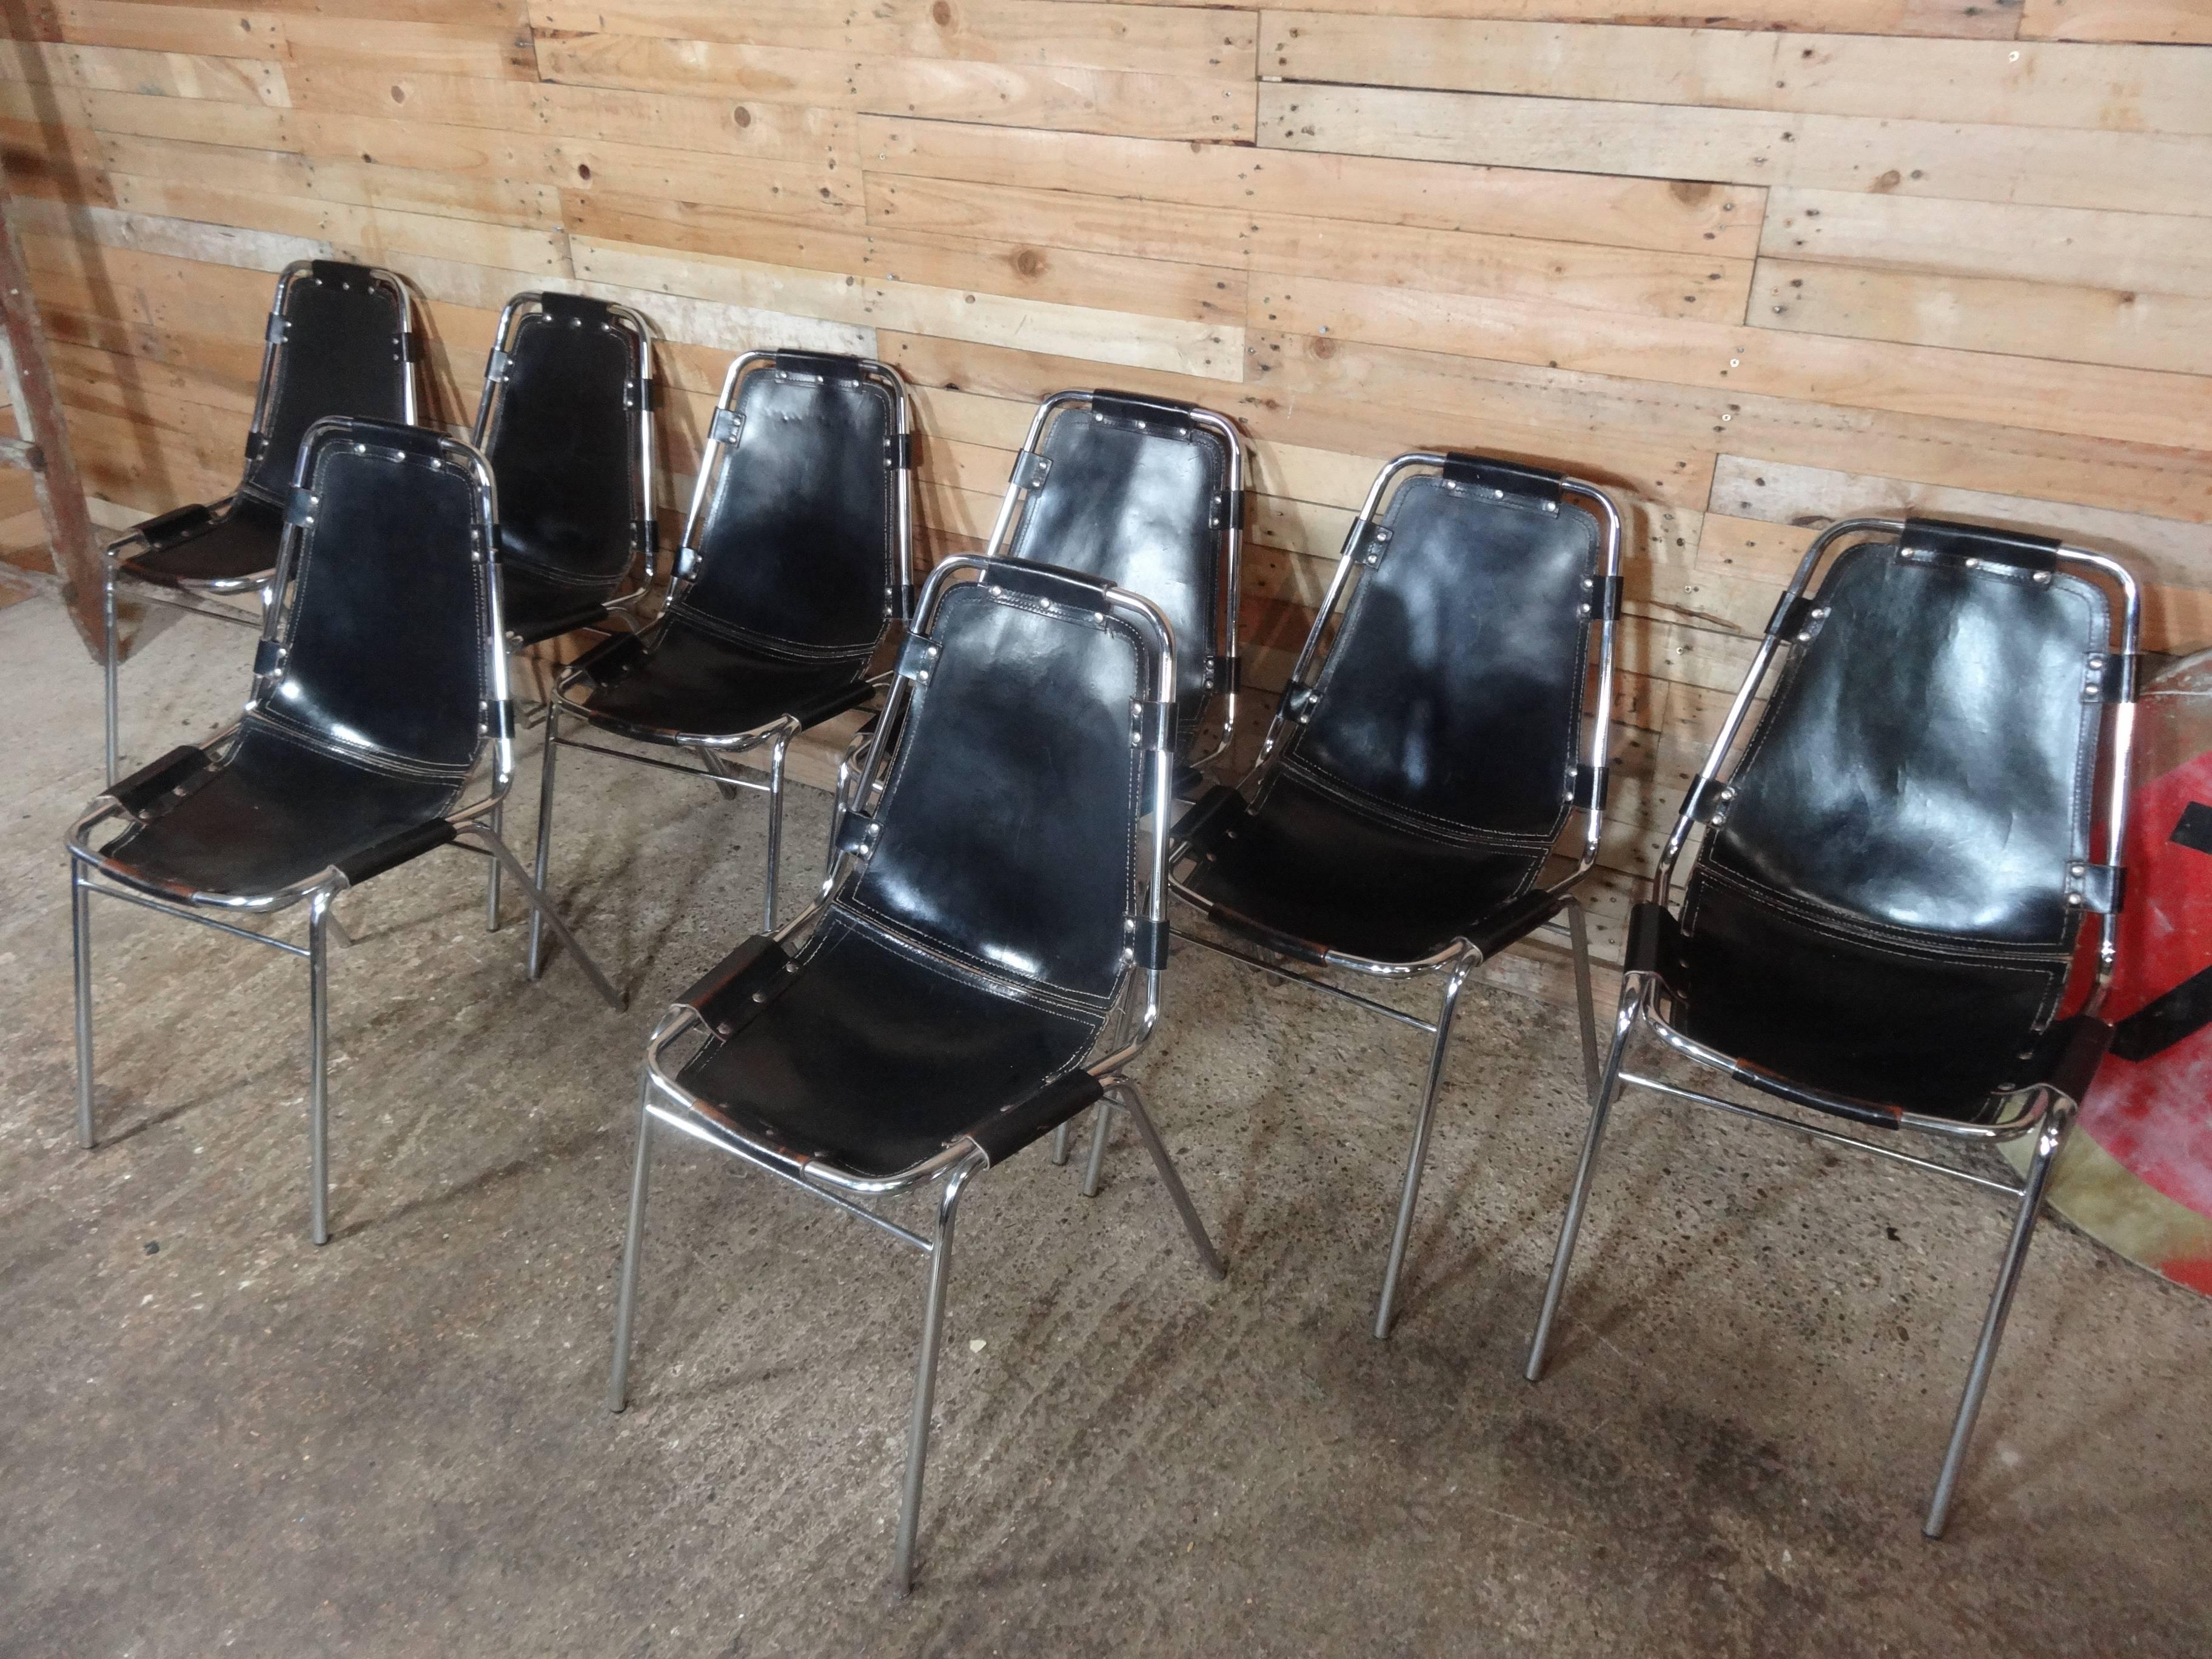 Only set of eight black leather Charlotte Perriand chairs! Chosen by Charlotte Perriand for and used in the Ski Resort Les Arcs, circa 1960. These chairs were commissioned to be made by DalVera. Very nice chrome tubular frame with thick brown